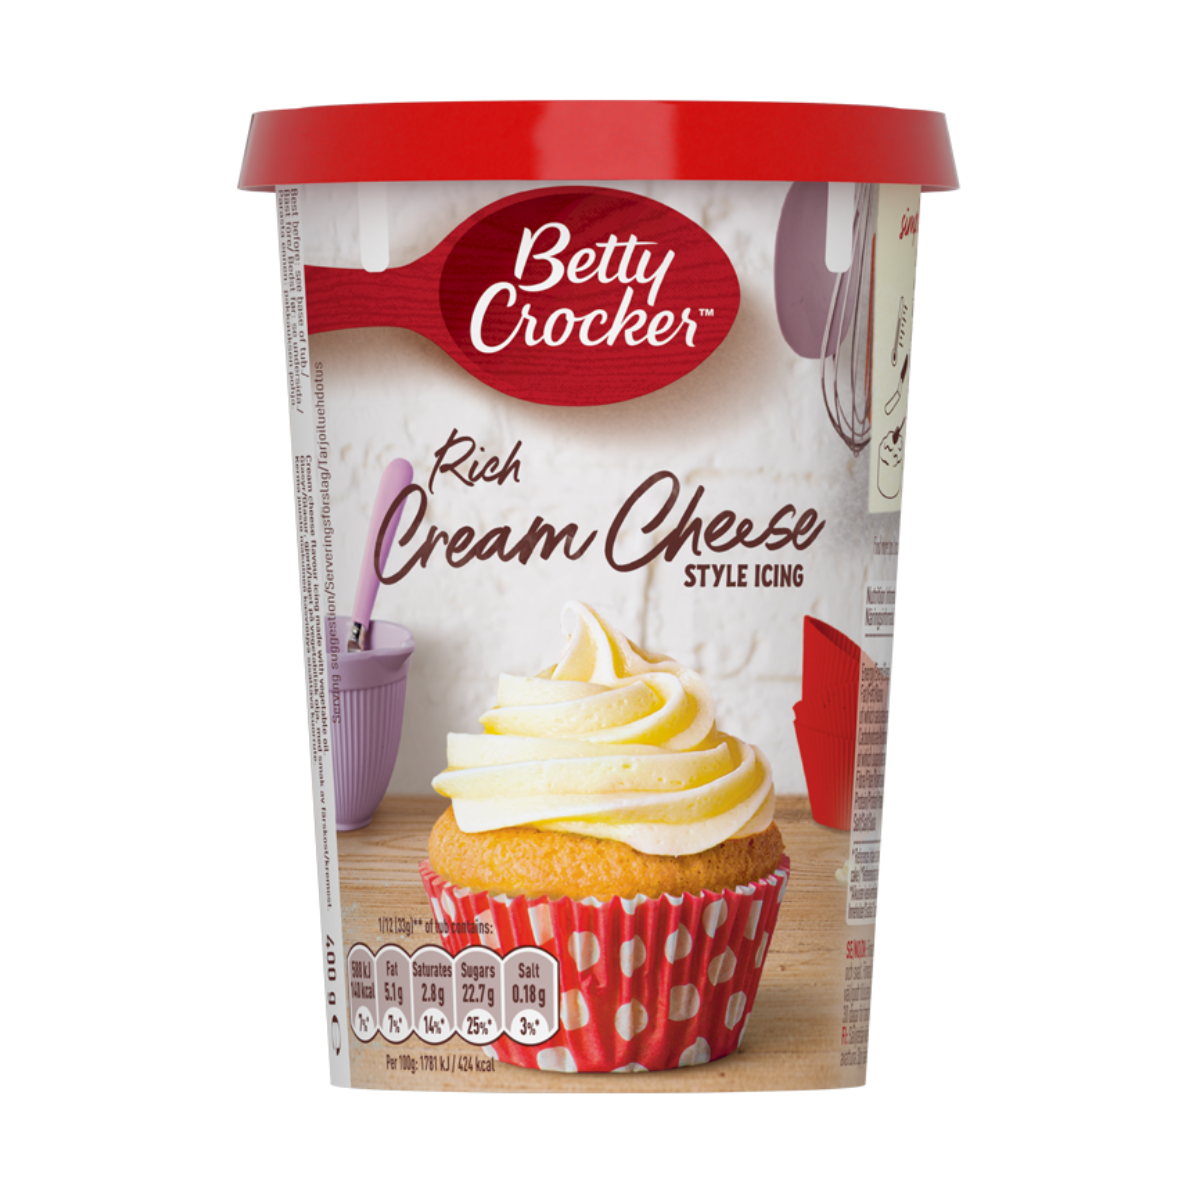 Betty Crocker Cream Cheese Style Icing - Frosting - Cheesecake Icing (400g)